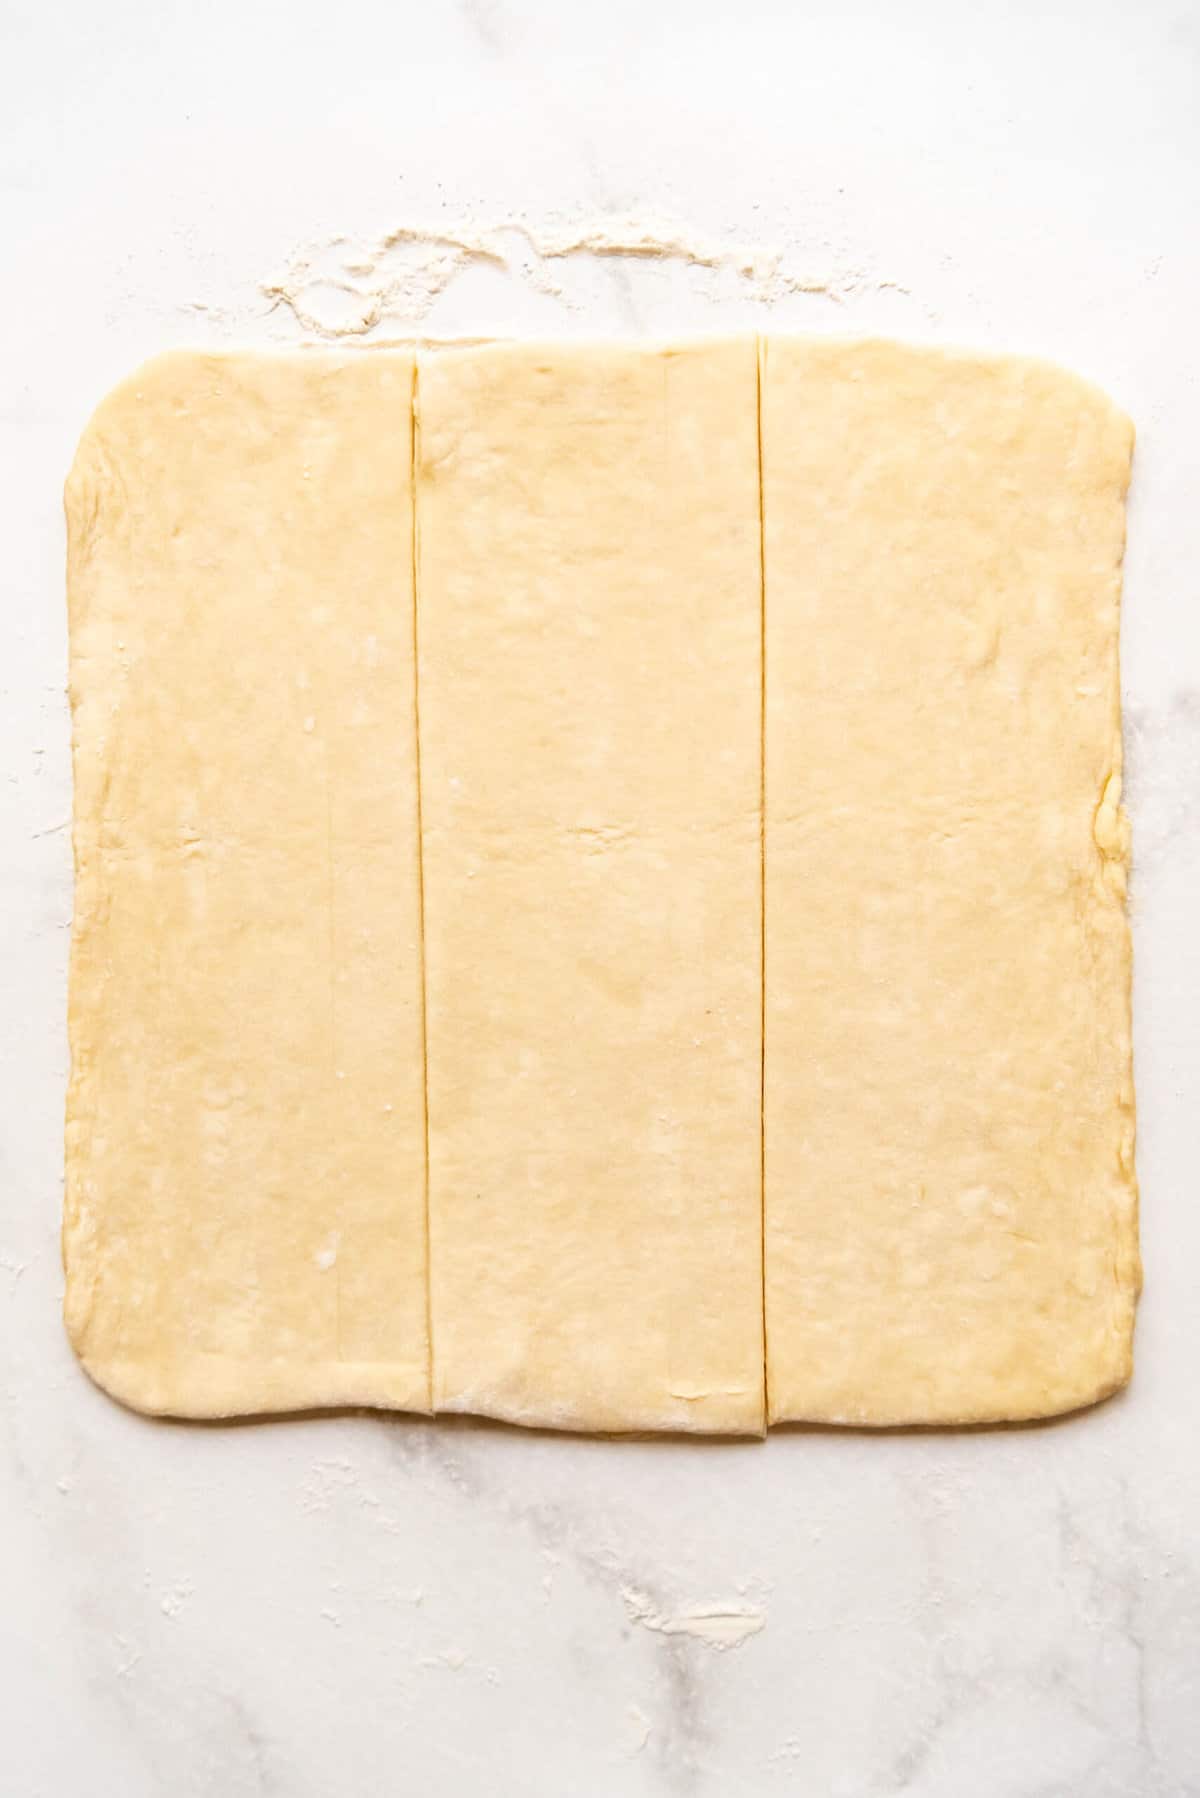 A square of bear claw dough sliced into thirds. 